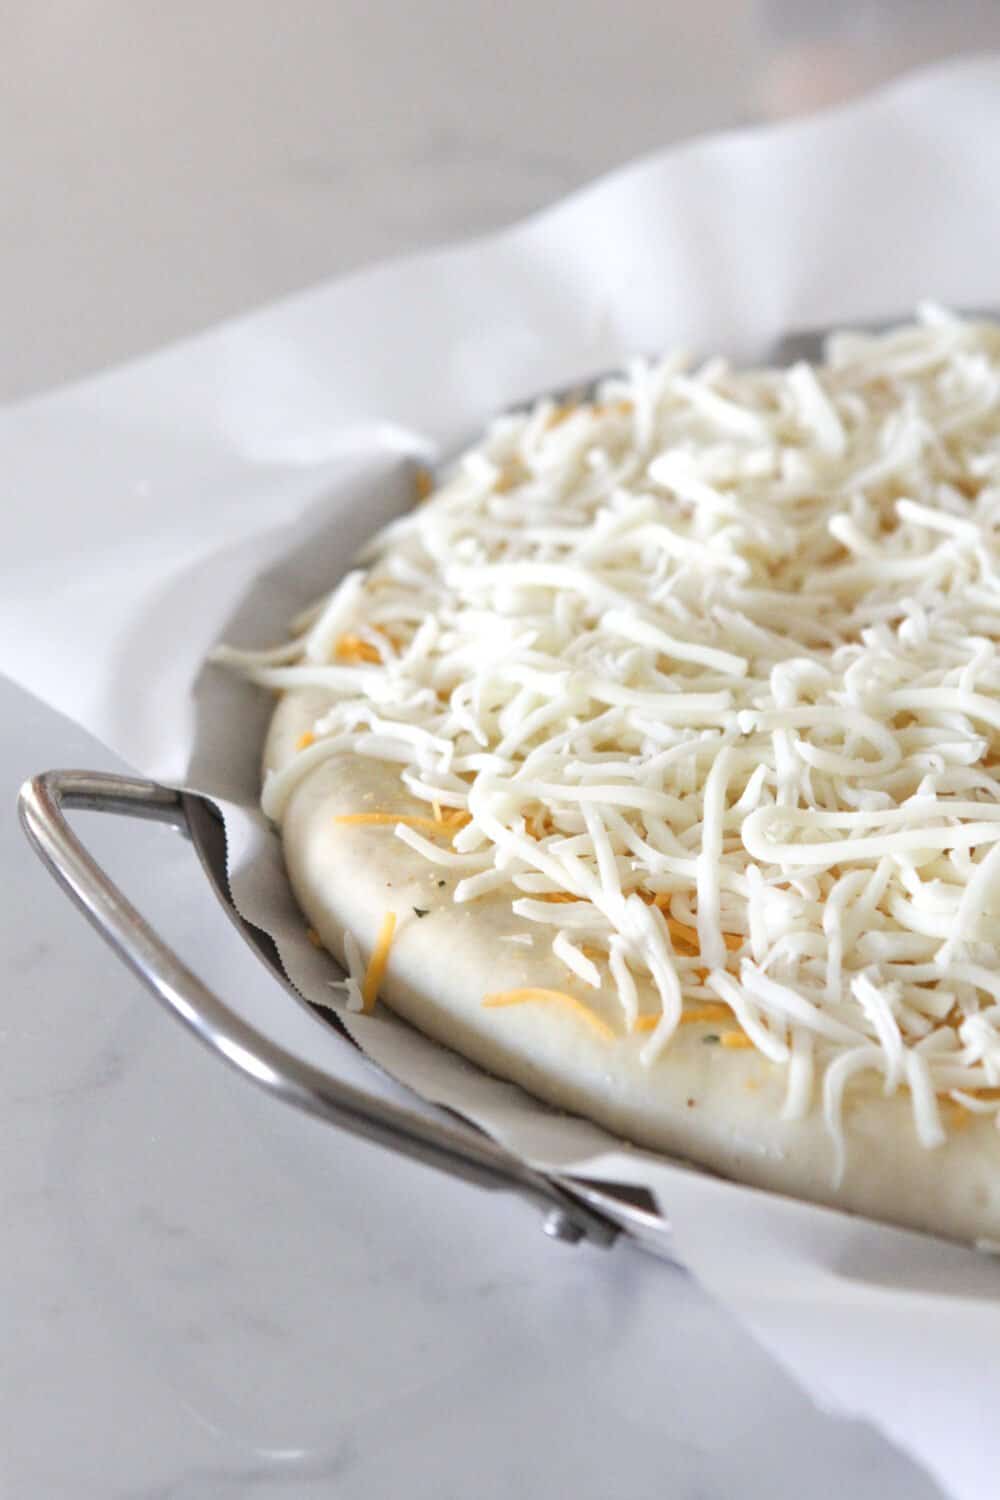 shredded cheese on top of pizza dough